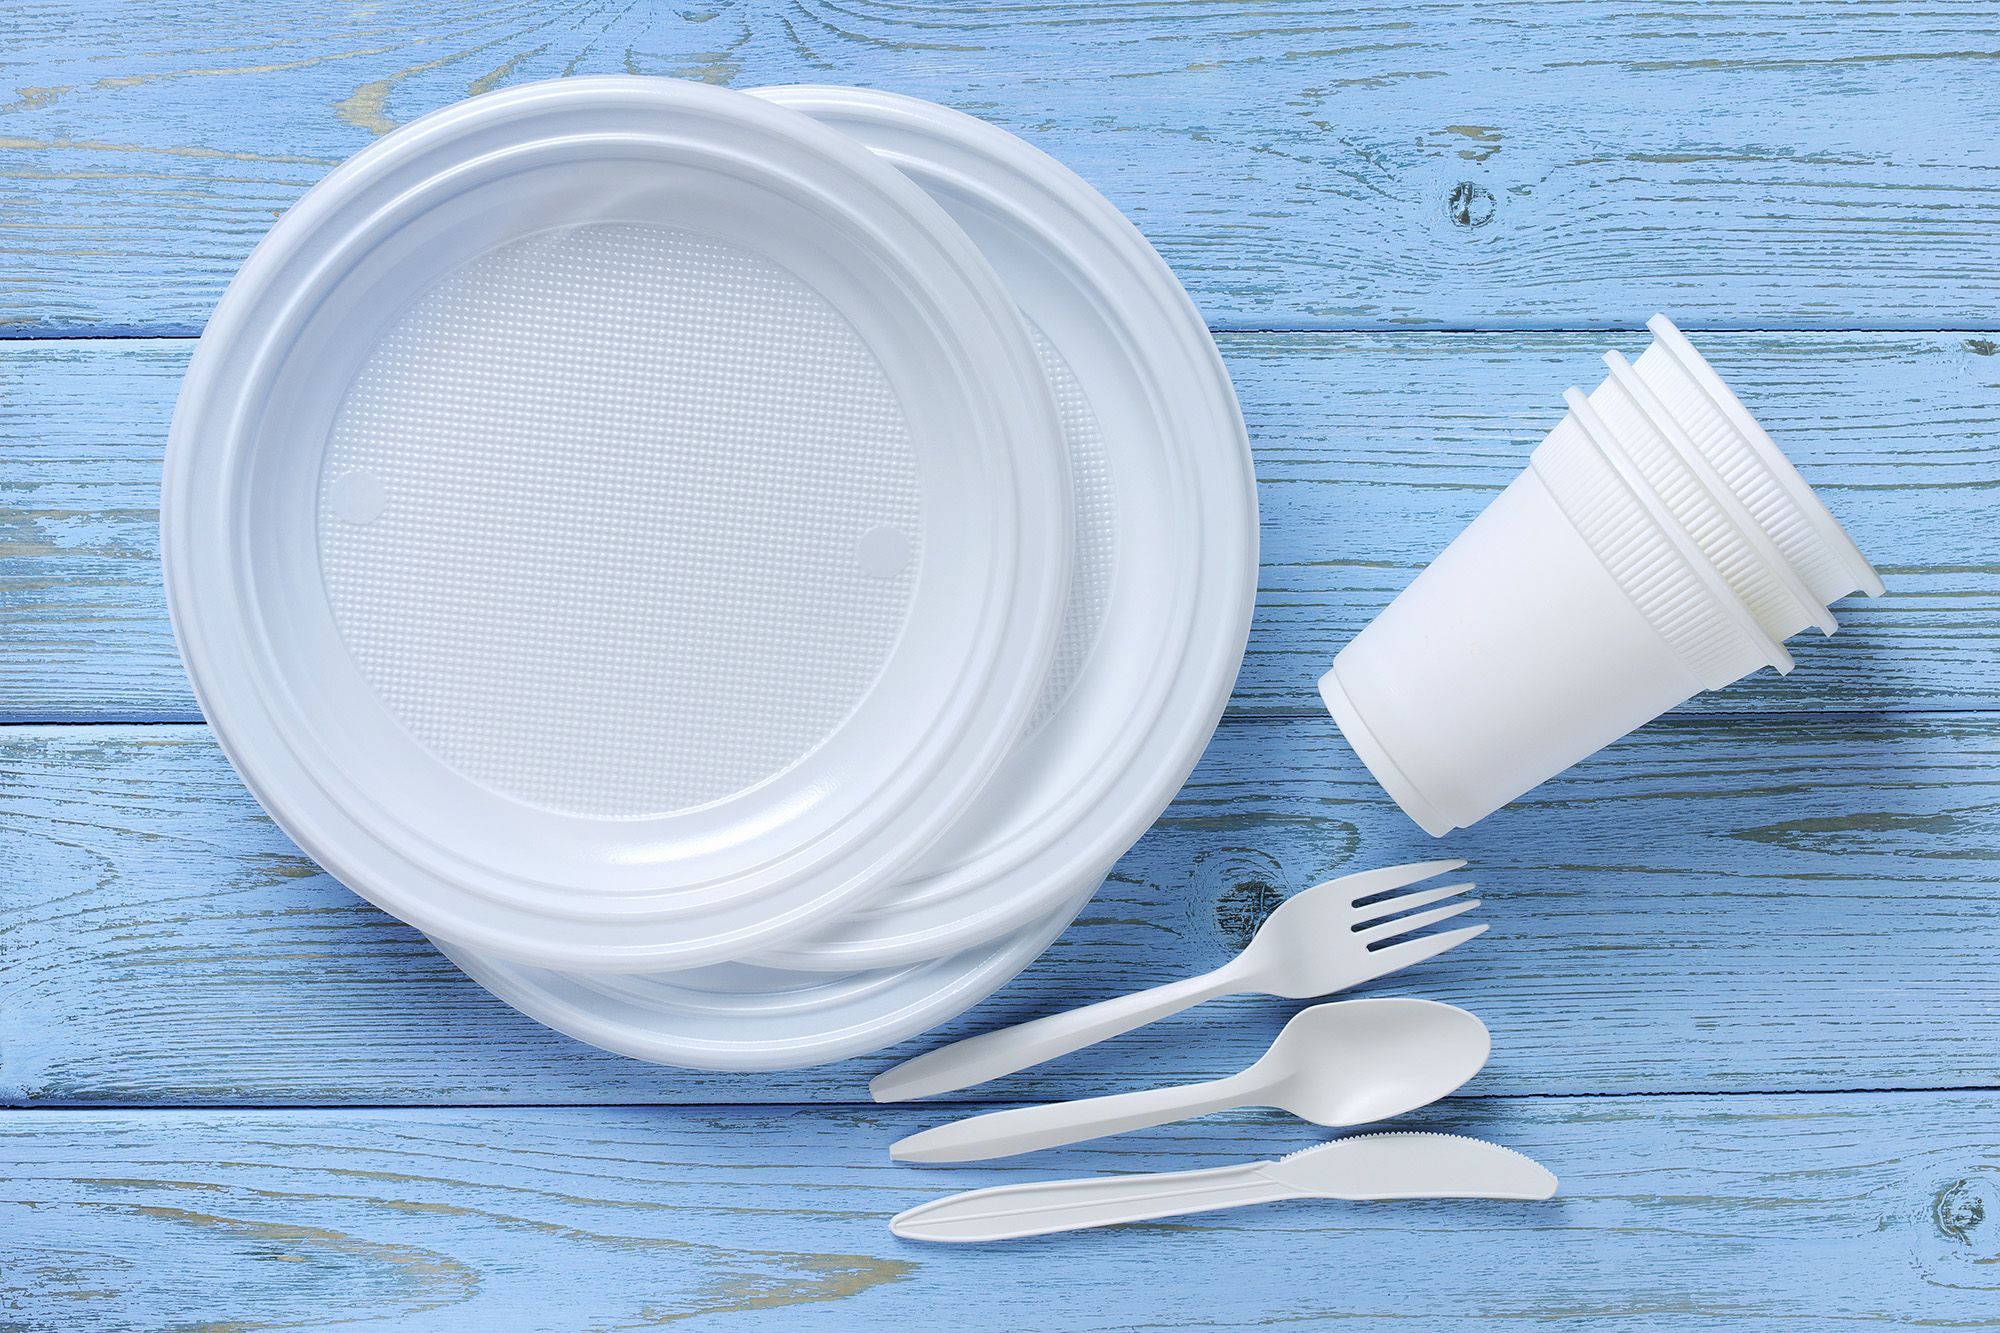 Ban on disposable plastic food utensils and single-use bags starts Thursday  in Honolulu